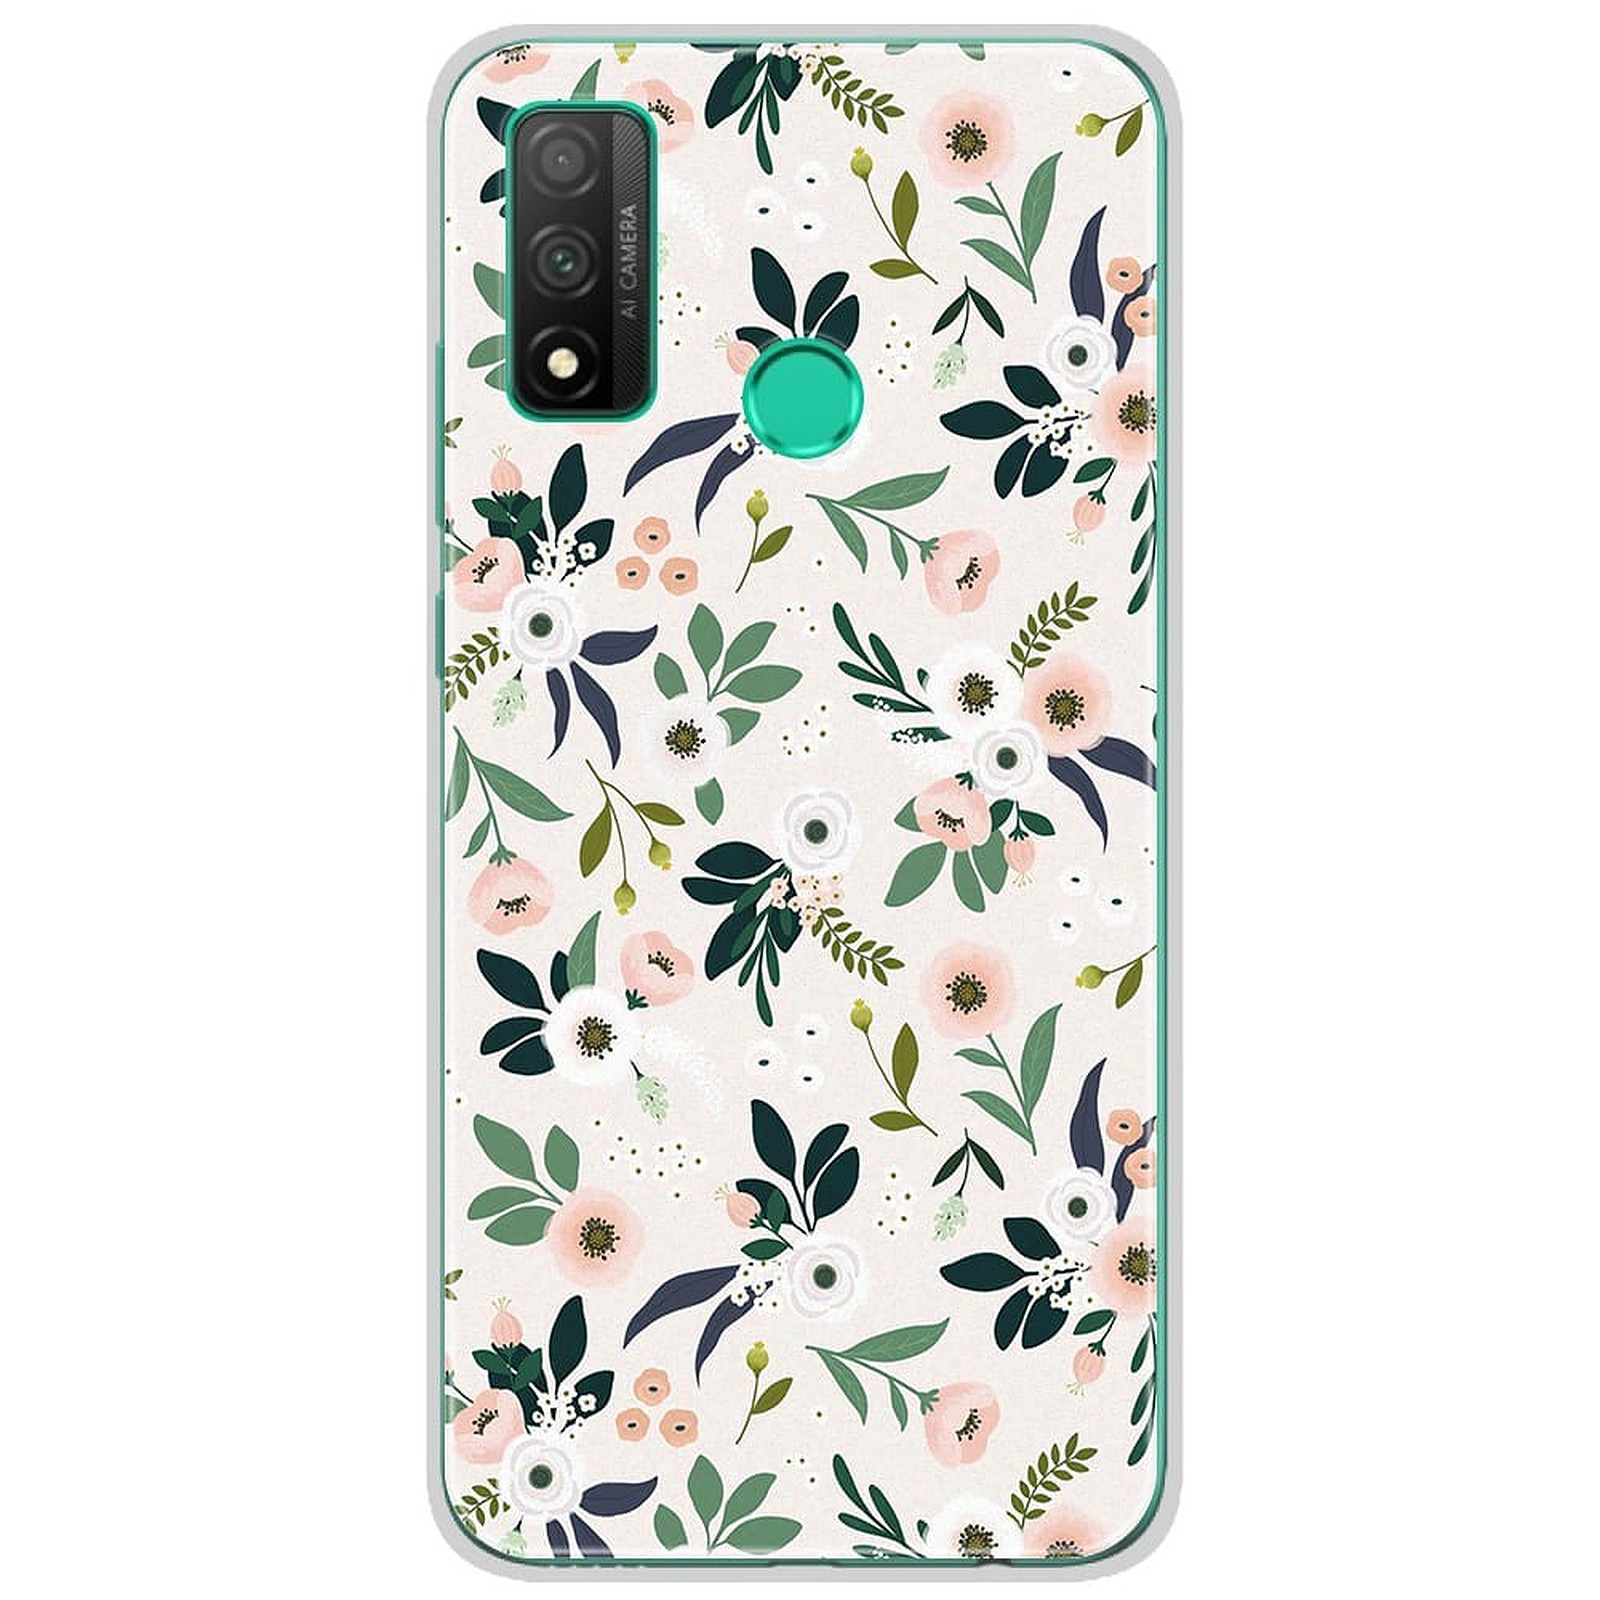 1001 Coques Coque silicone gel Huawei P Smart 2020 motif Flowers - Coque telephone 1001Coques